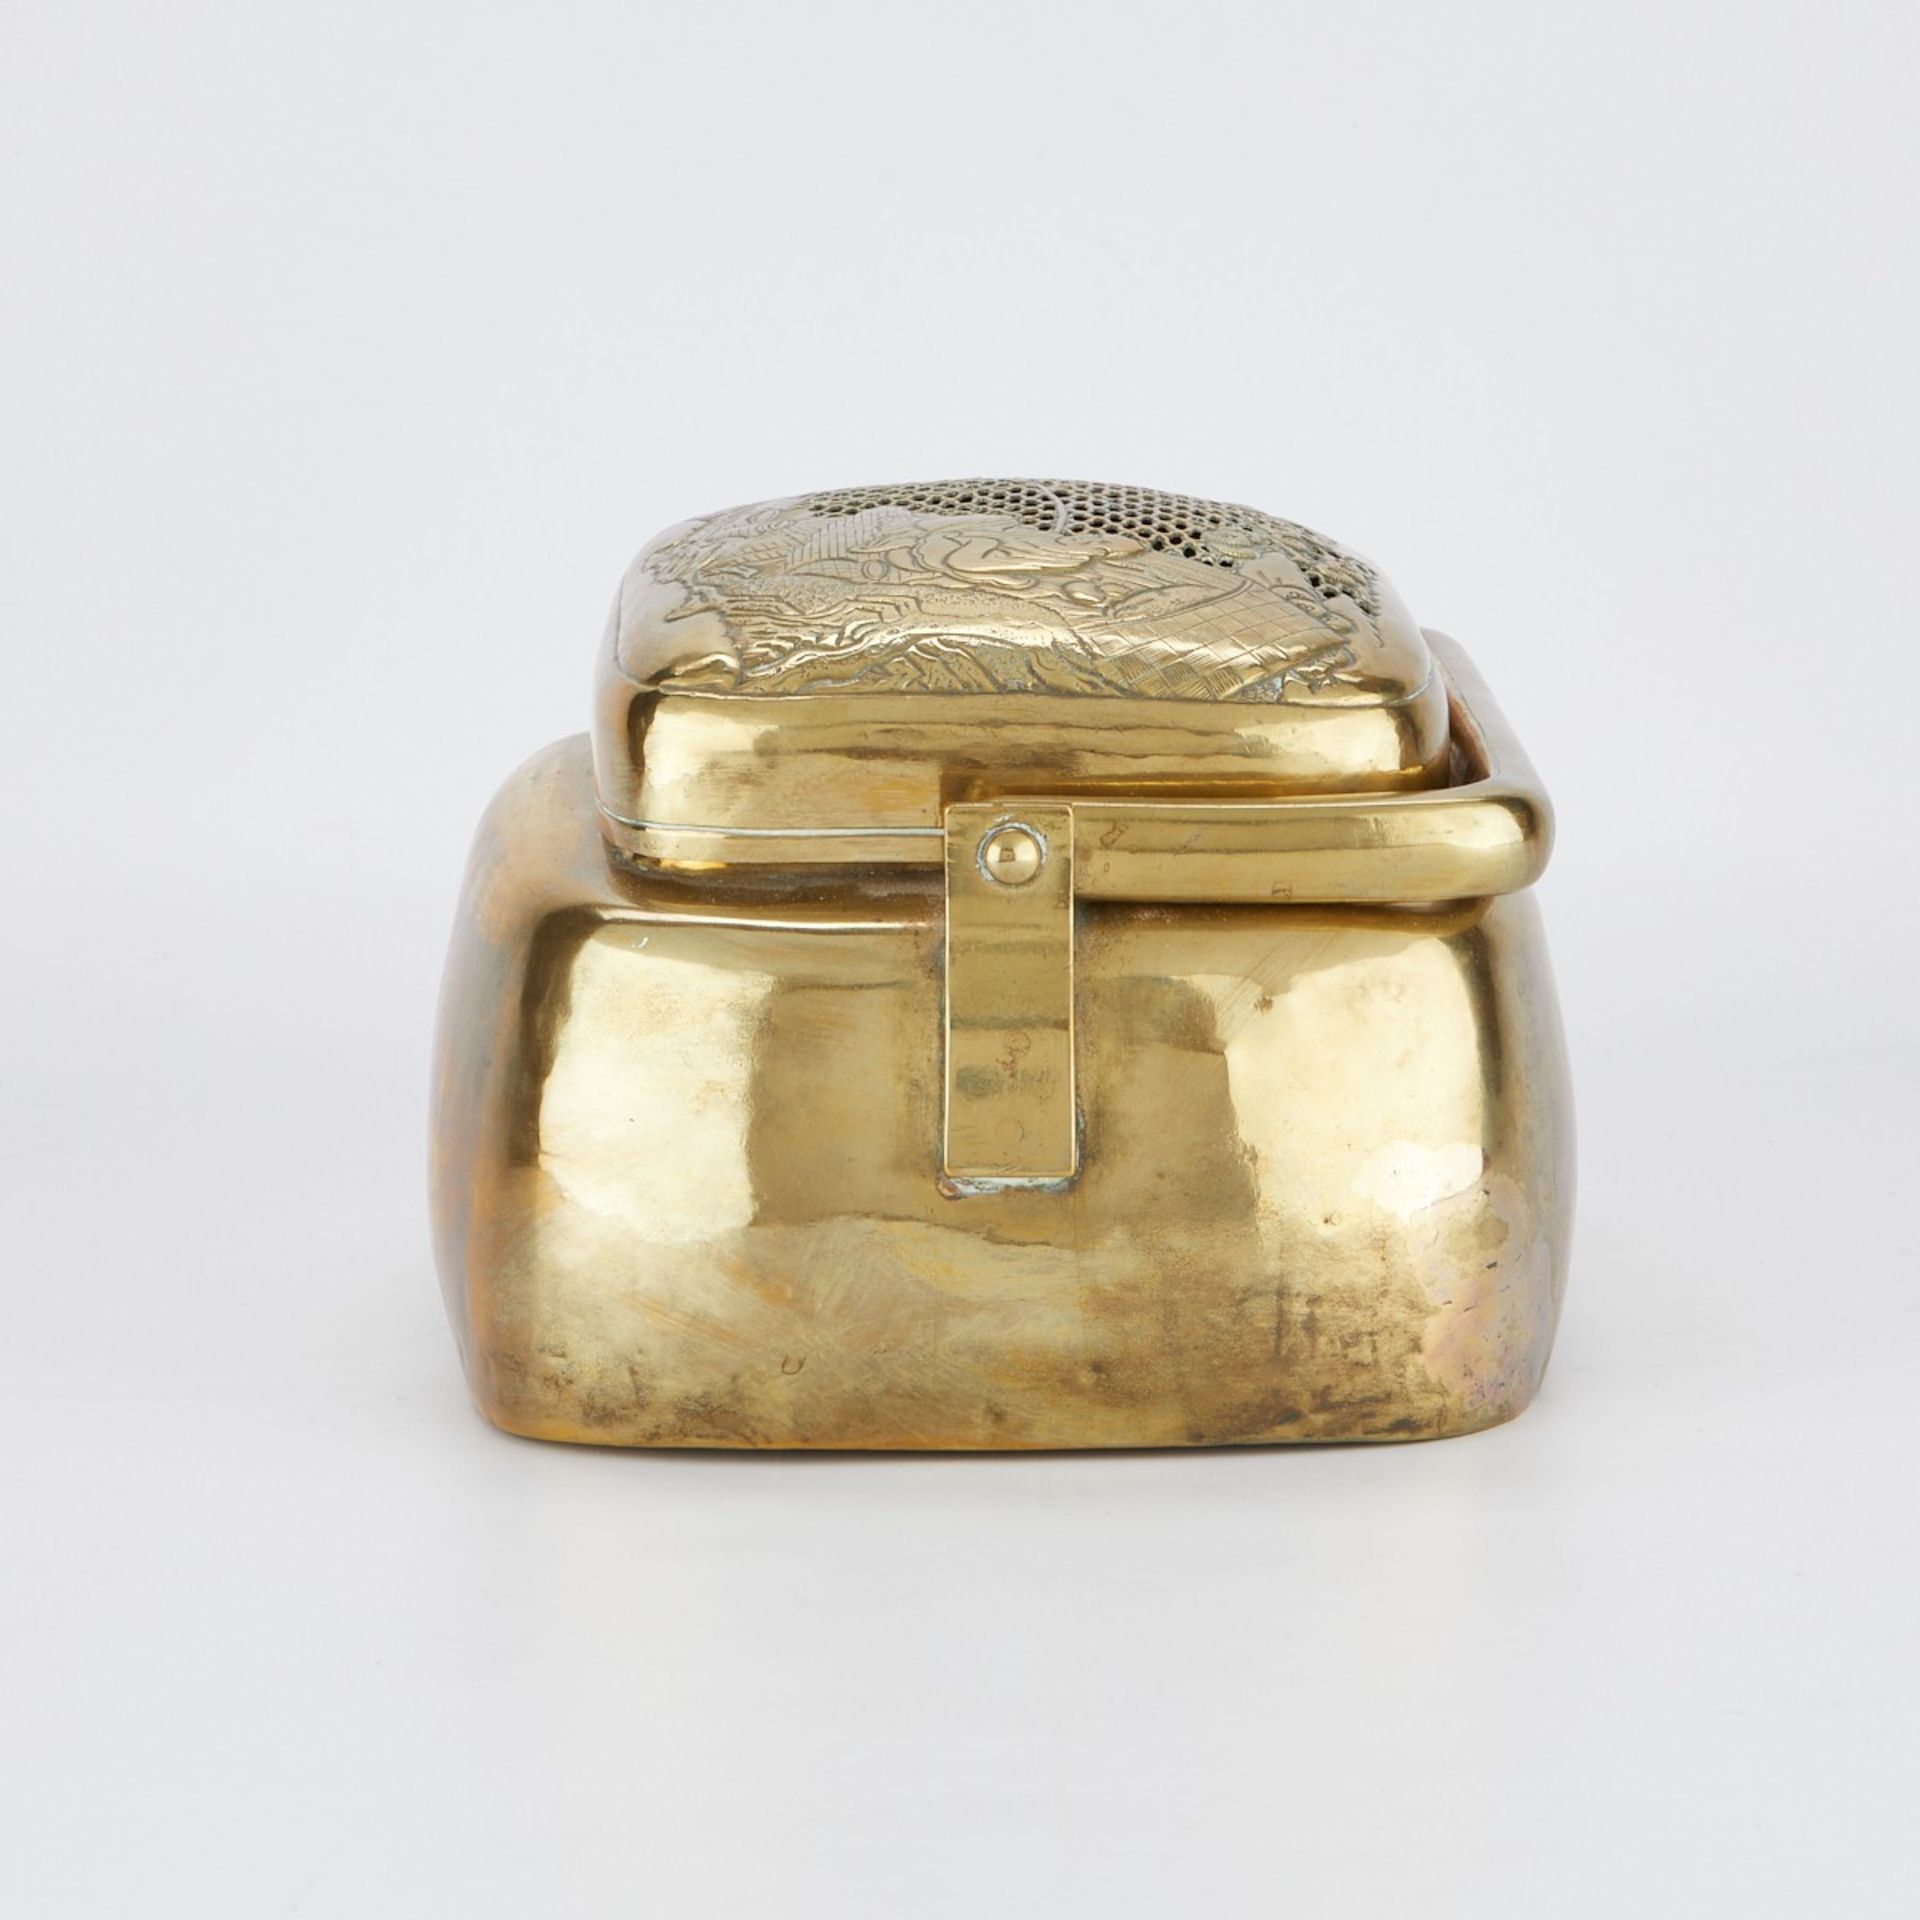 Lrg Chinese Qing Brass Hand Foot Warmer - Image 6 of 8